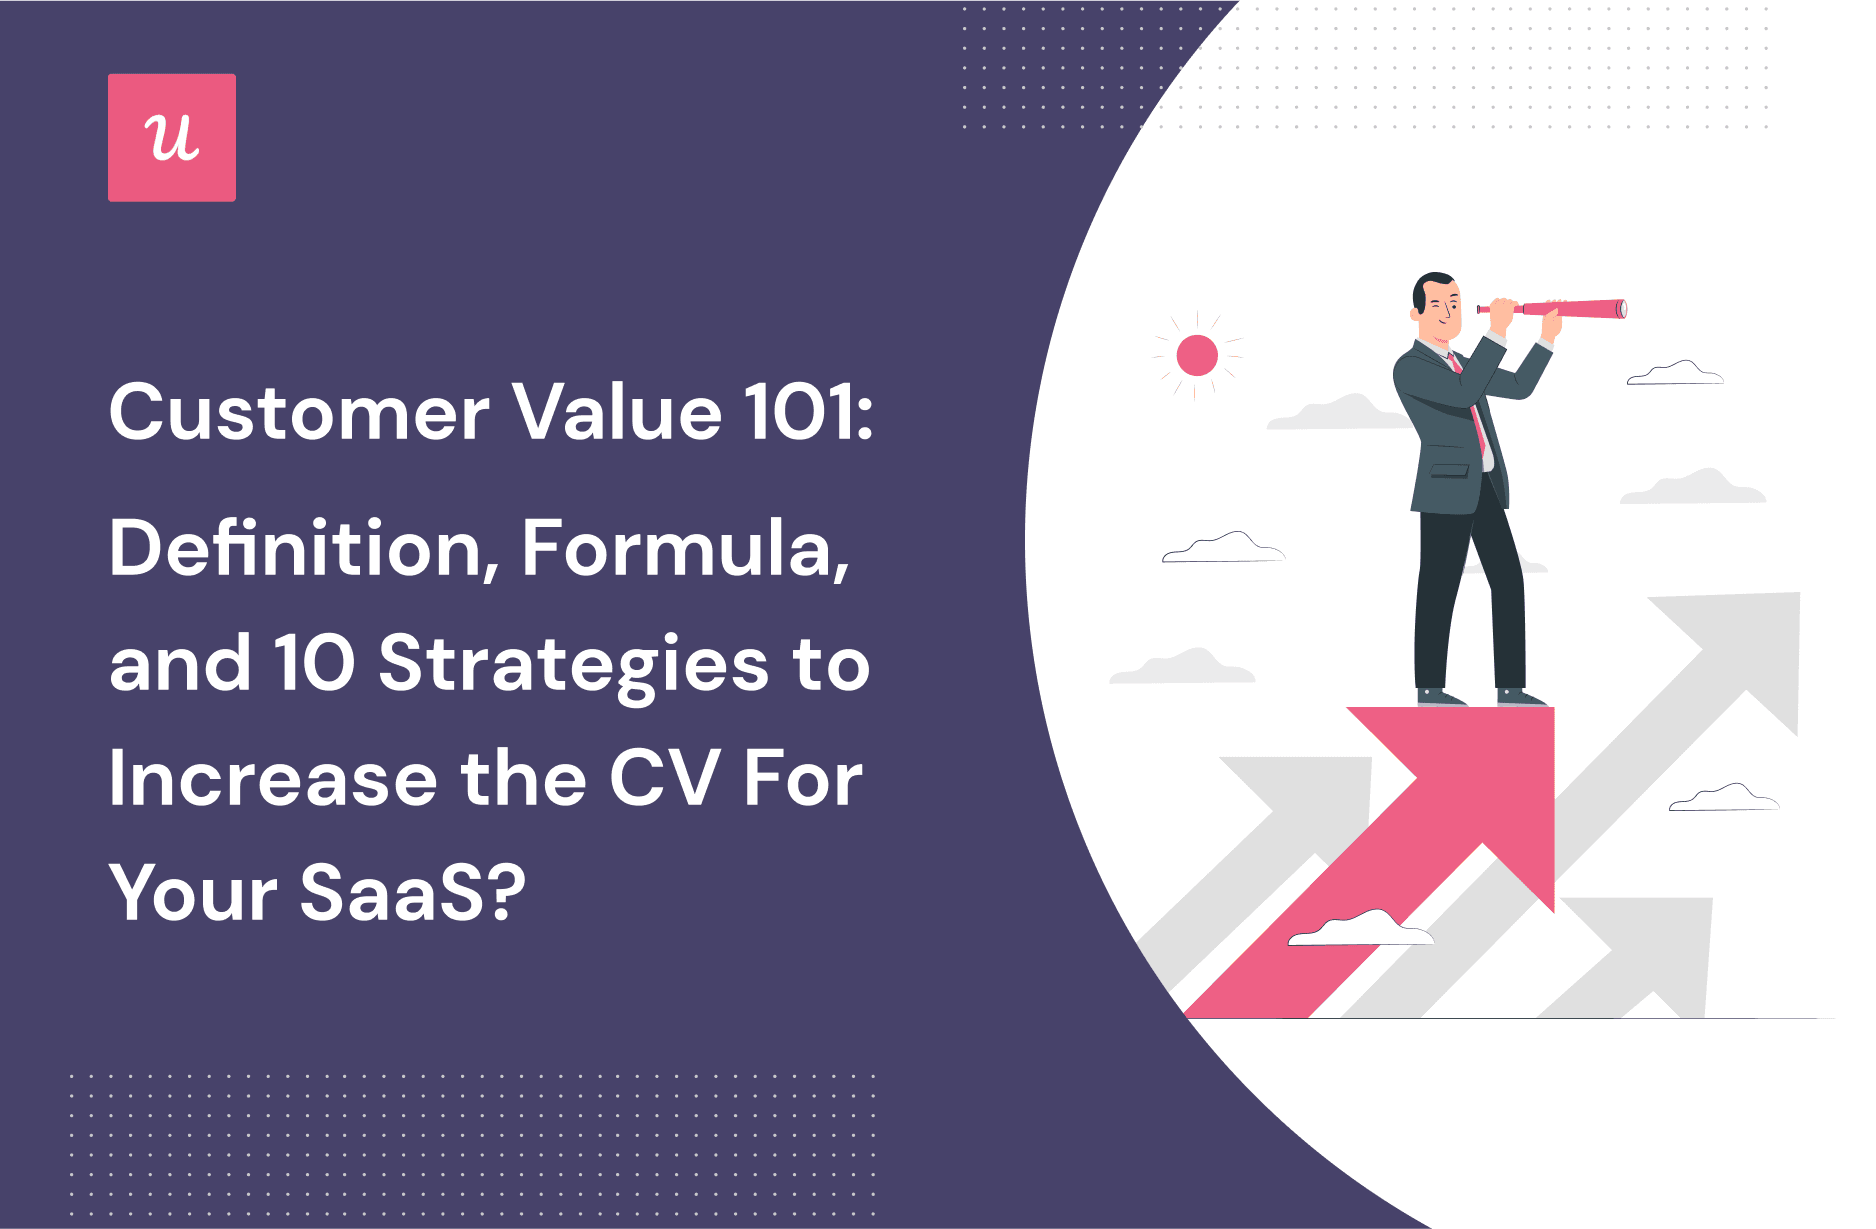 Customer Value 101: Definition, Formula, and 10 Strategies To Increase the CV for Your SaaS cover